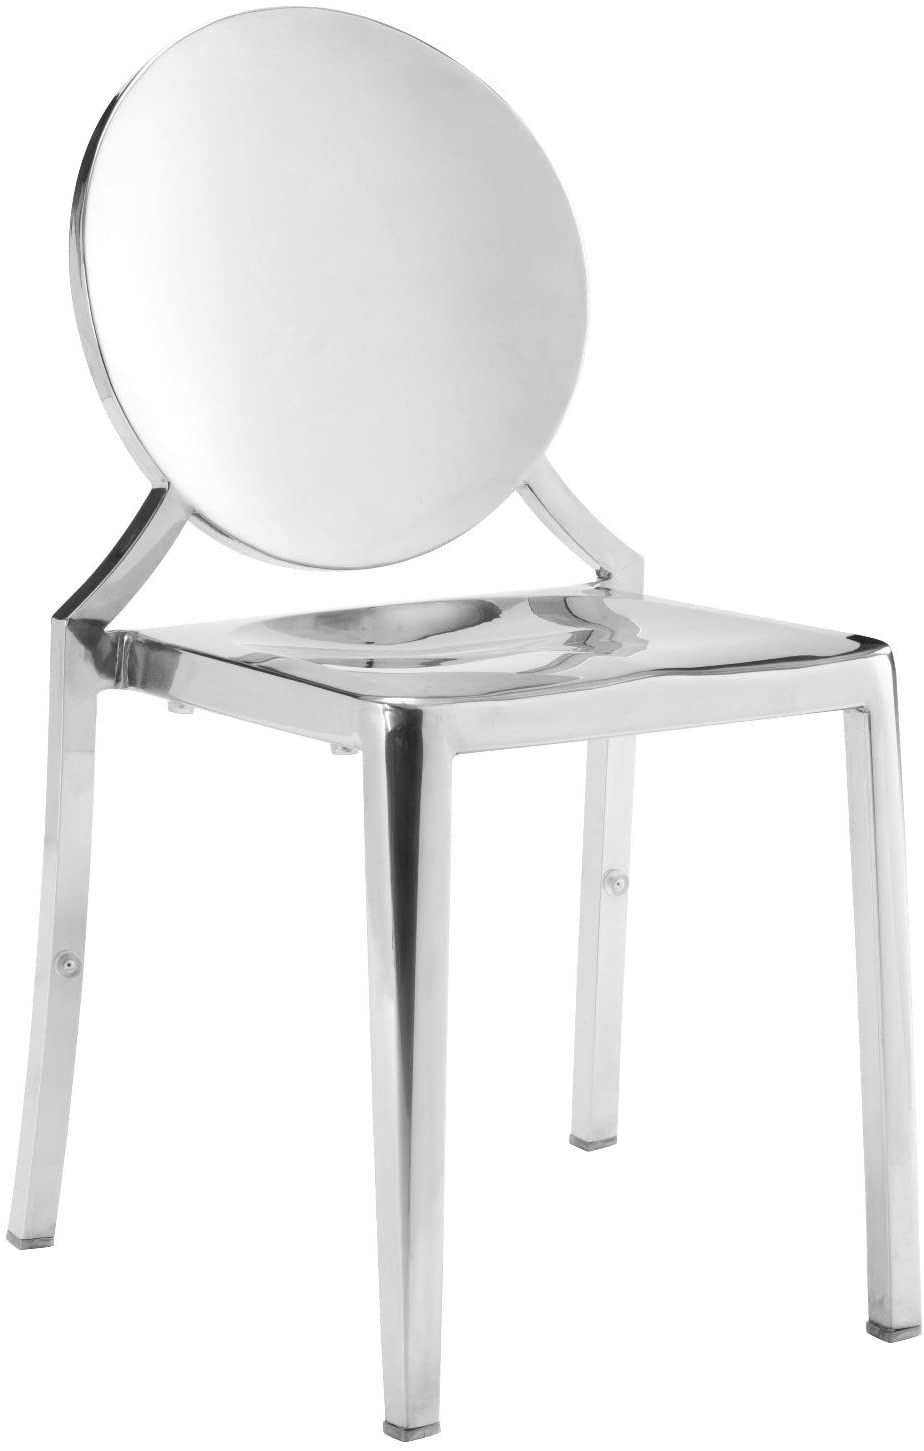 B07649JKNL Modern Contemporary Urban Kitchen Room Dining Chair, Silver, Metal Stainless Set of 2